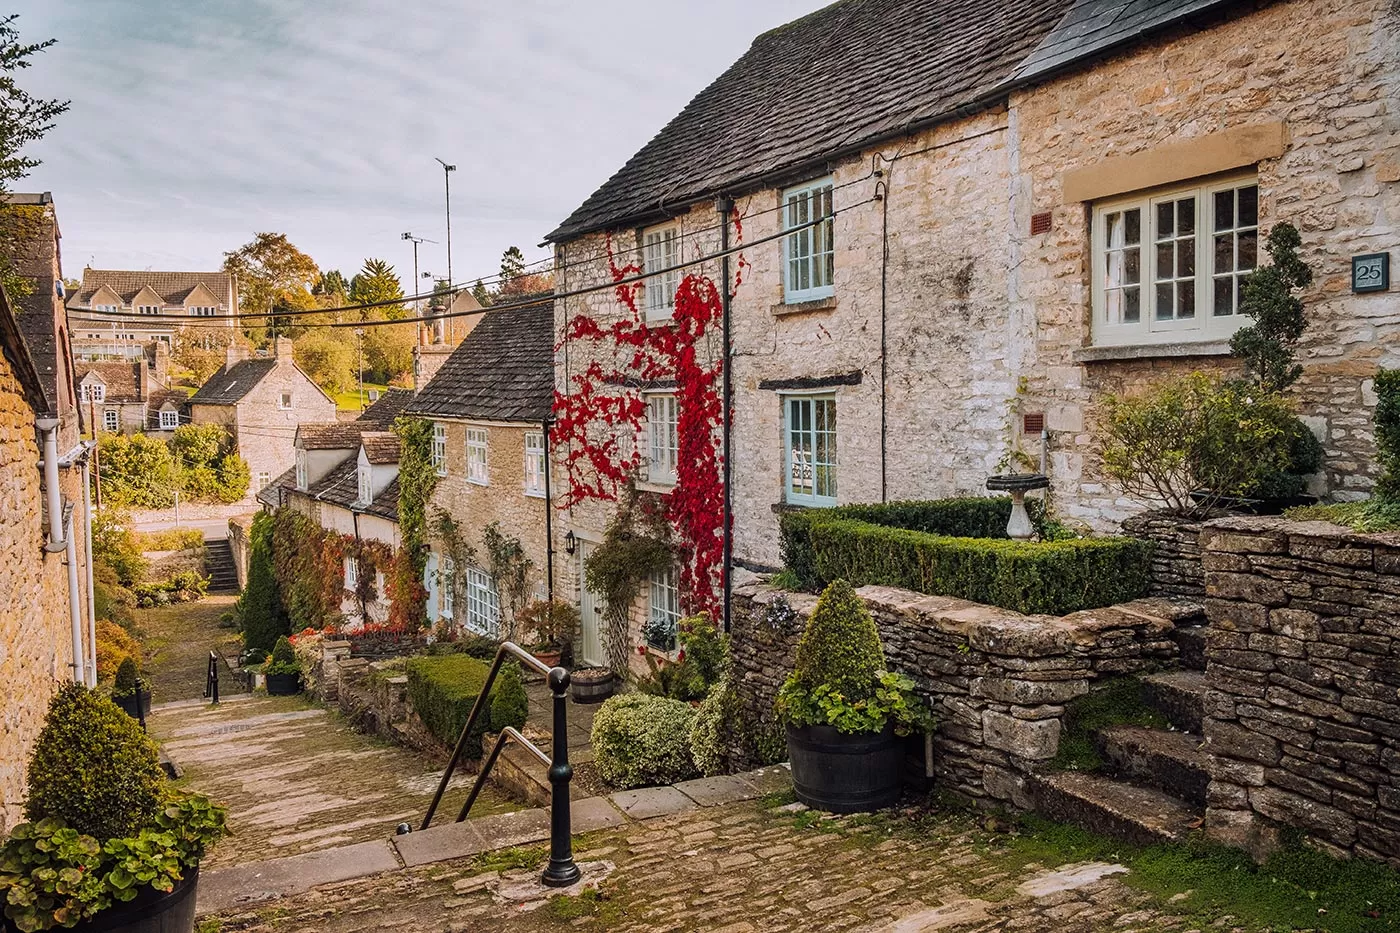 Cotswolds Best Villages - Tetbury - Cottages on Chipping Steps